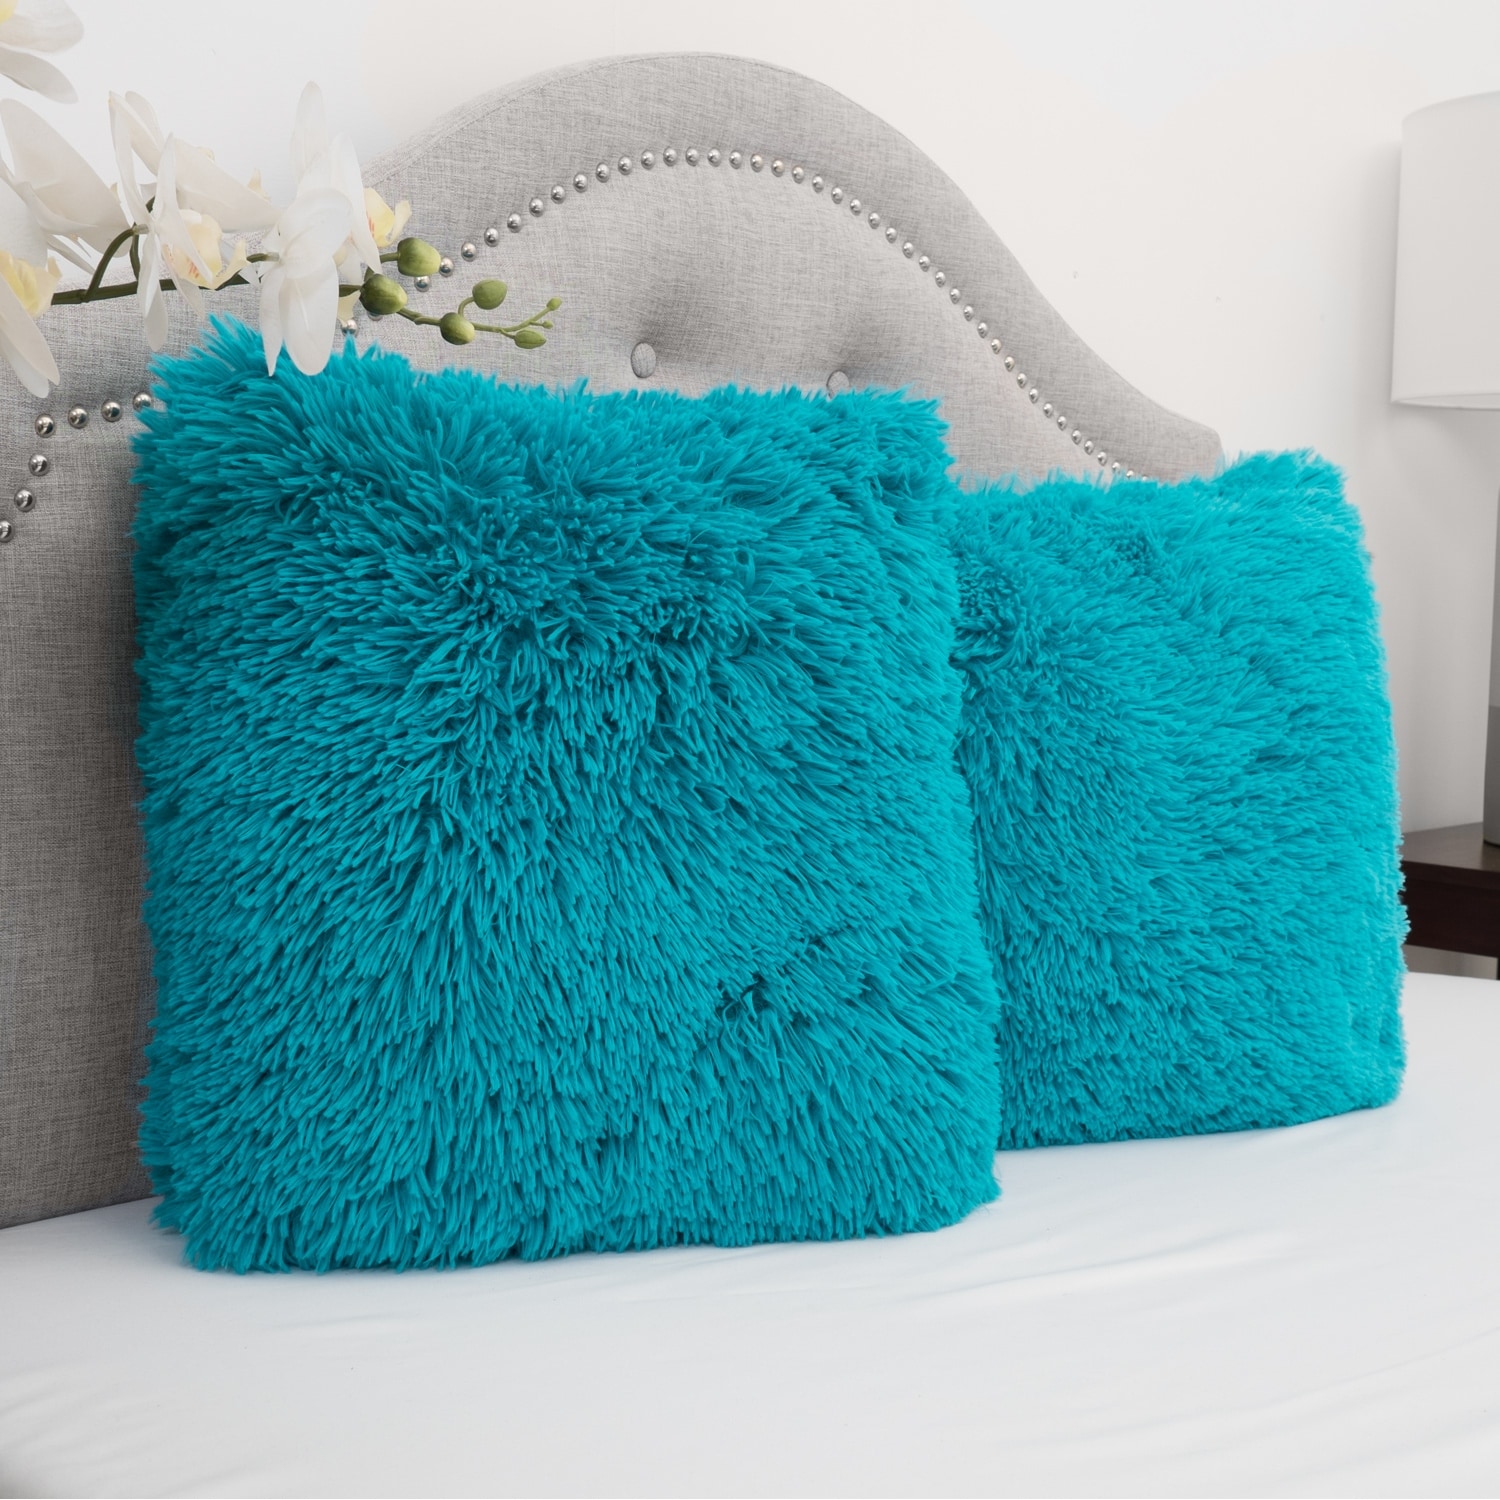 https://ak1.ostkcdn.com/images/products/is/images/direct/2382ab10363bd57fd3fc1c1d7f7eb5ff1bd57fd8/Colorful-Plush-2-Piece-Throw-Pillows-Set-%28Assorted-Colors%29.jpg